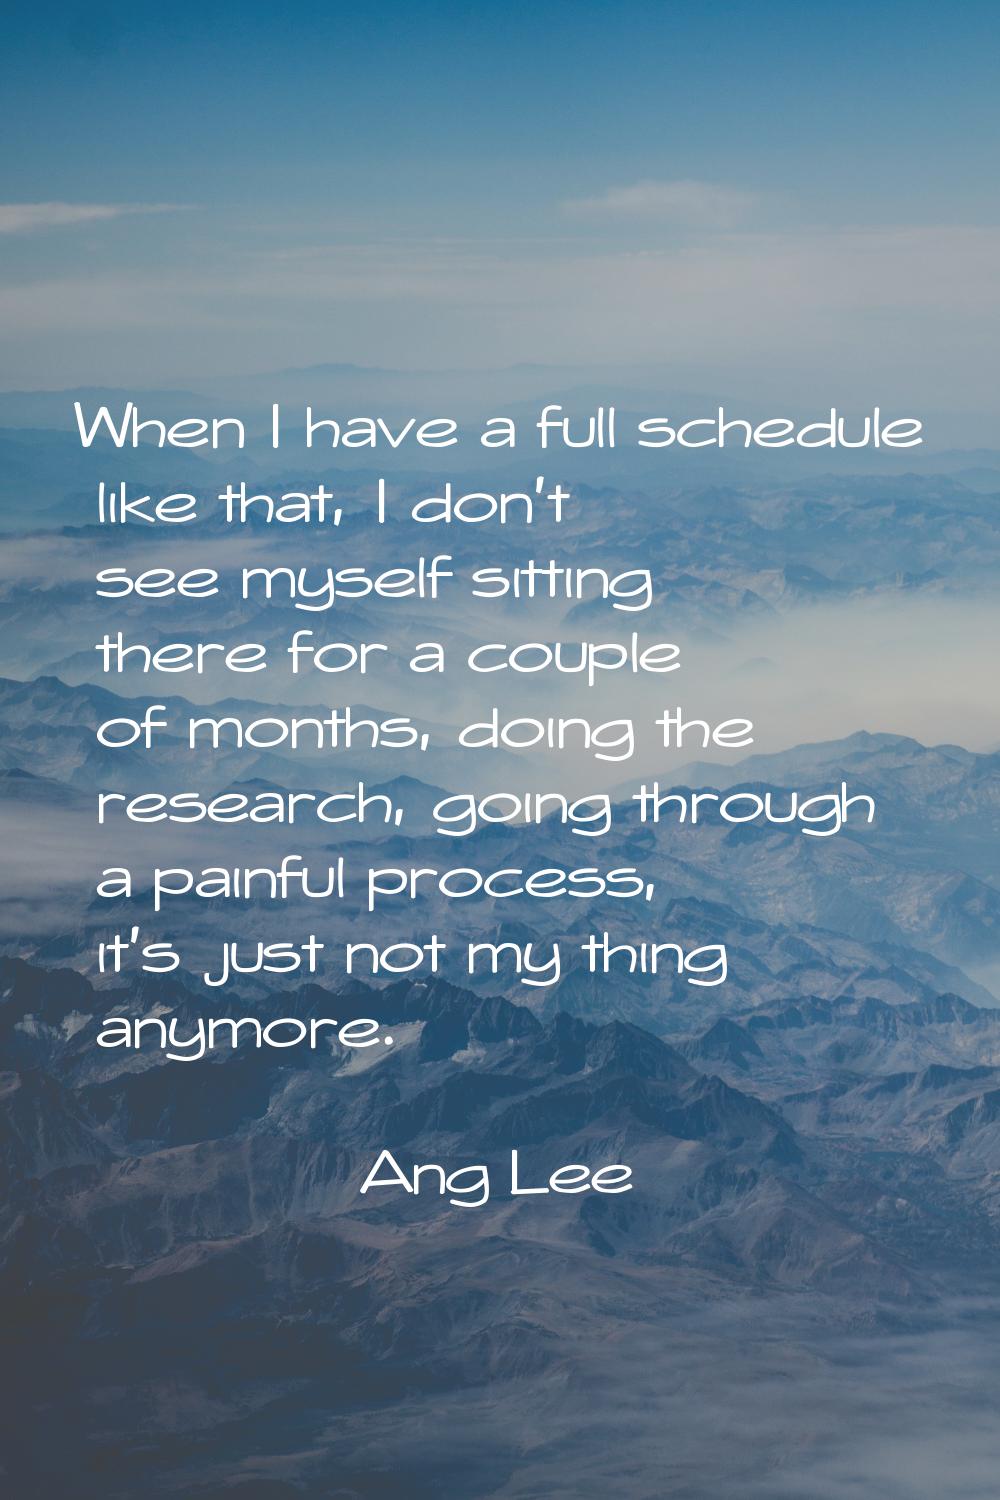 When I have a full schedule like that, I don't see myself sitting there for a couple of months, doi